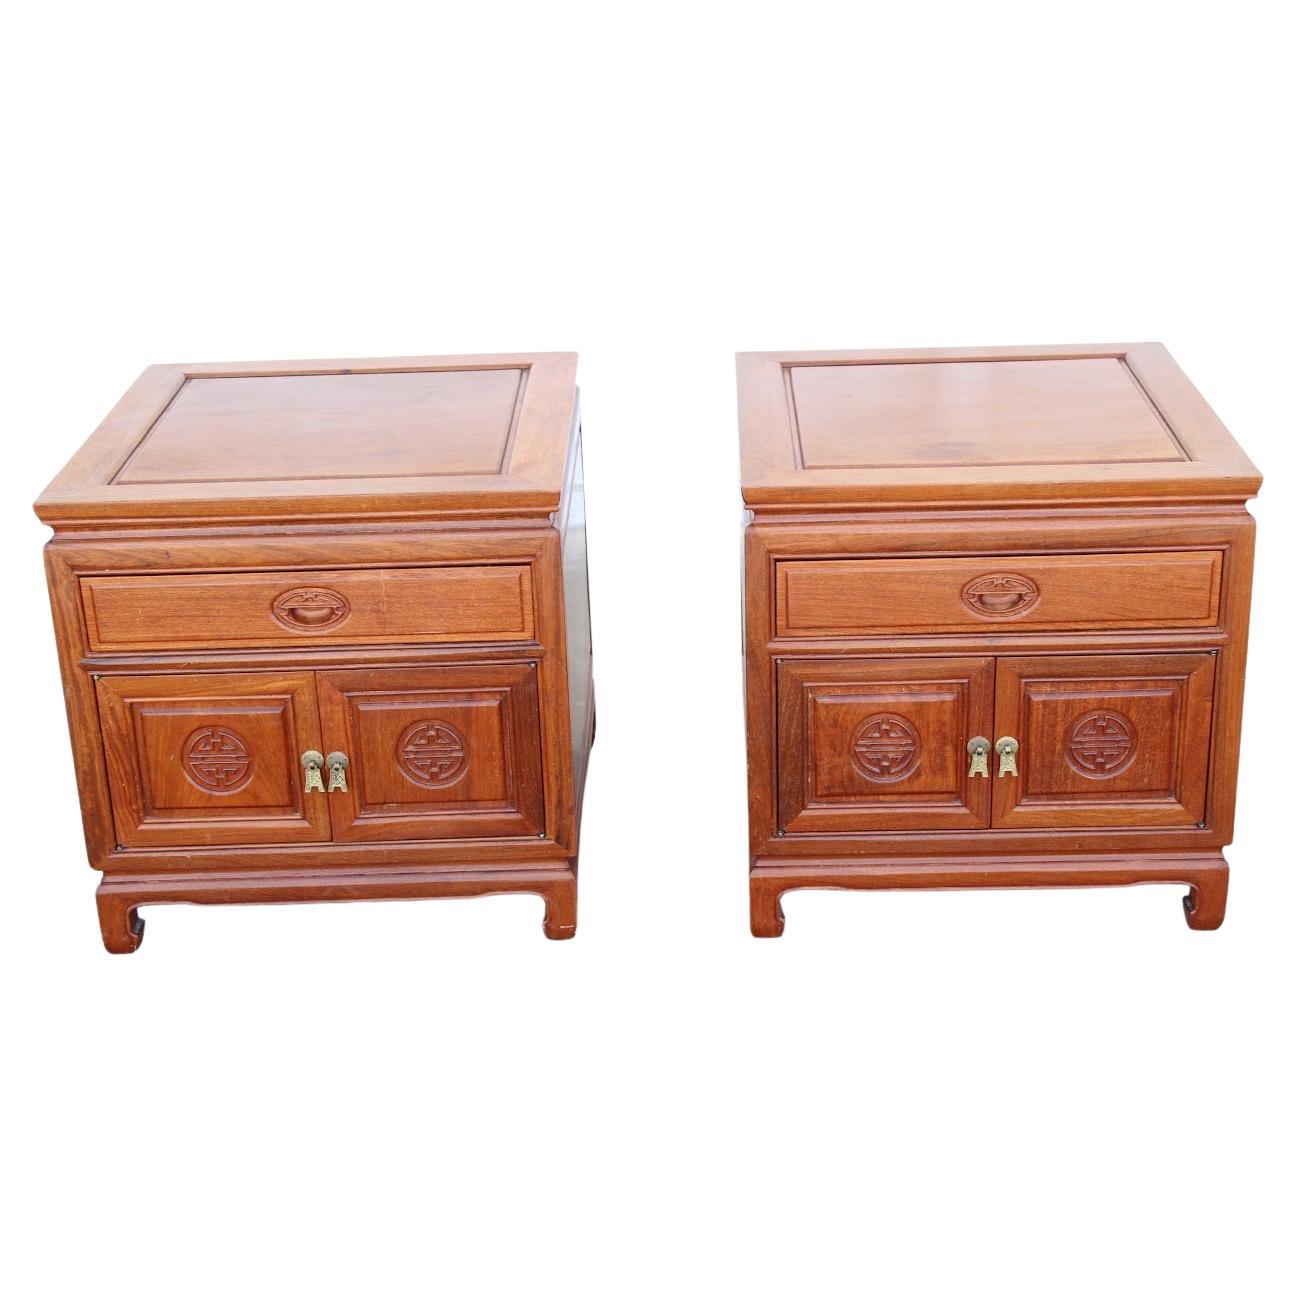 Pair Chinosarie Nightstands
1990s


Pair of beautifully carved bedside cabinets from Asia. Rosewood with bronze pulls.
One drawer with concealed shelving below.
 

Height: 22